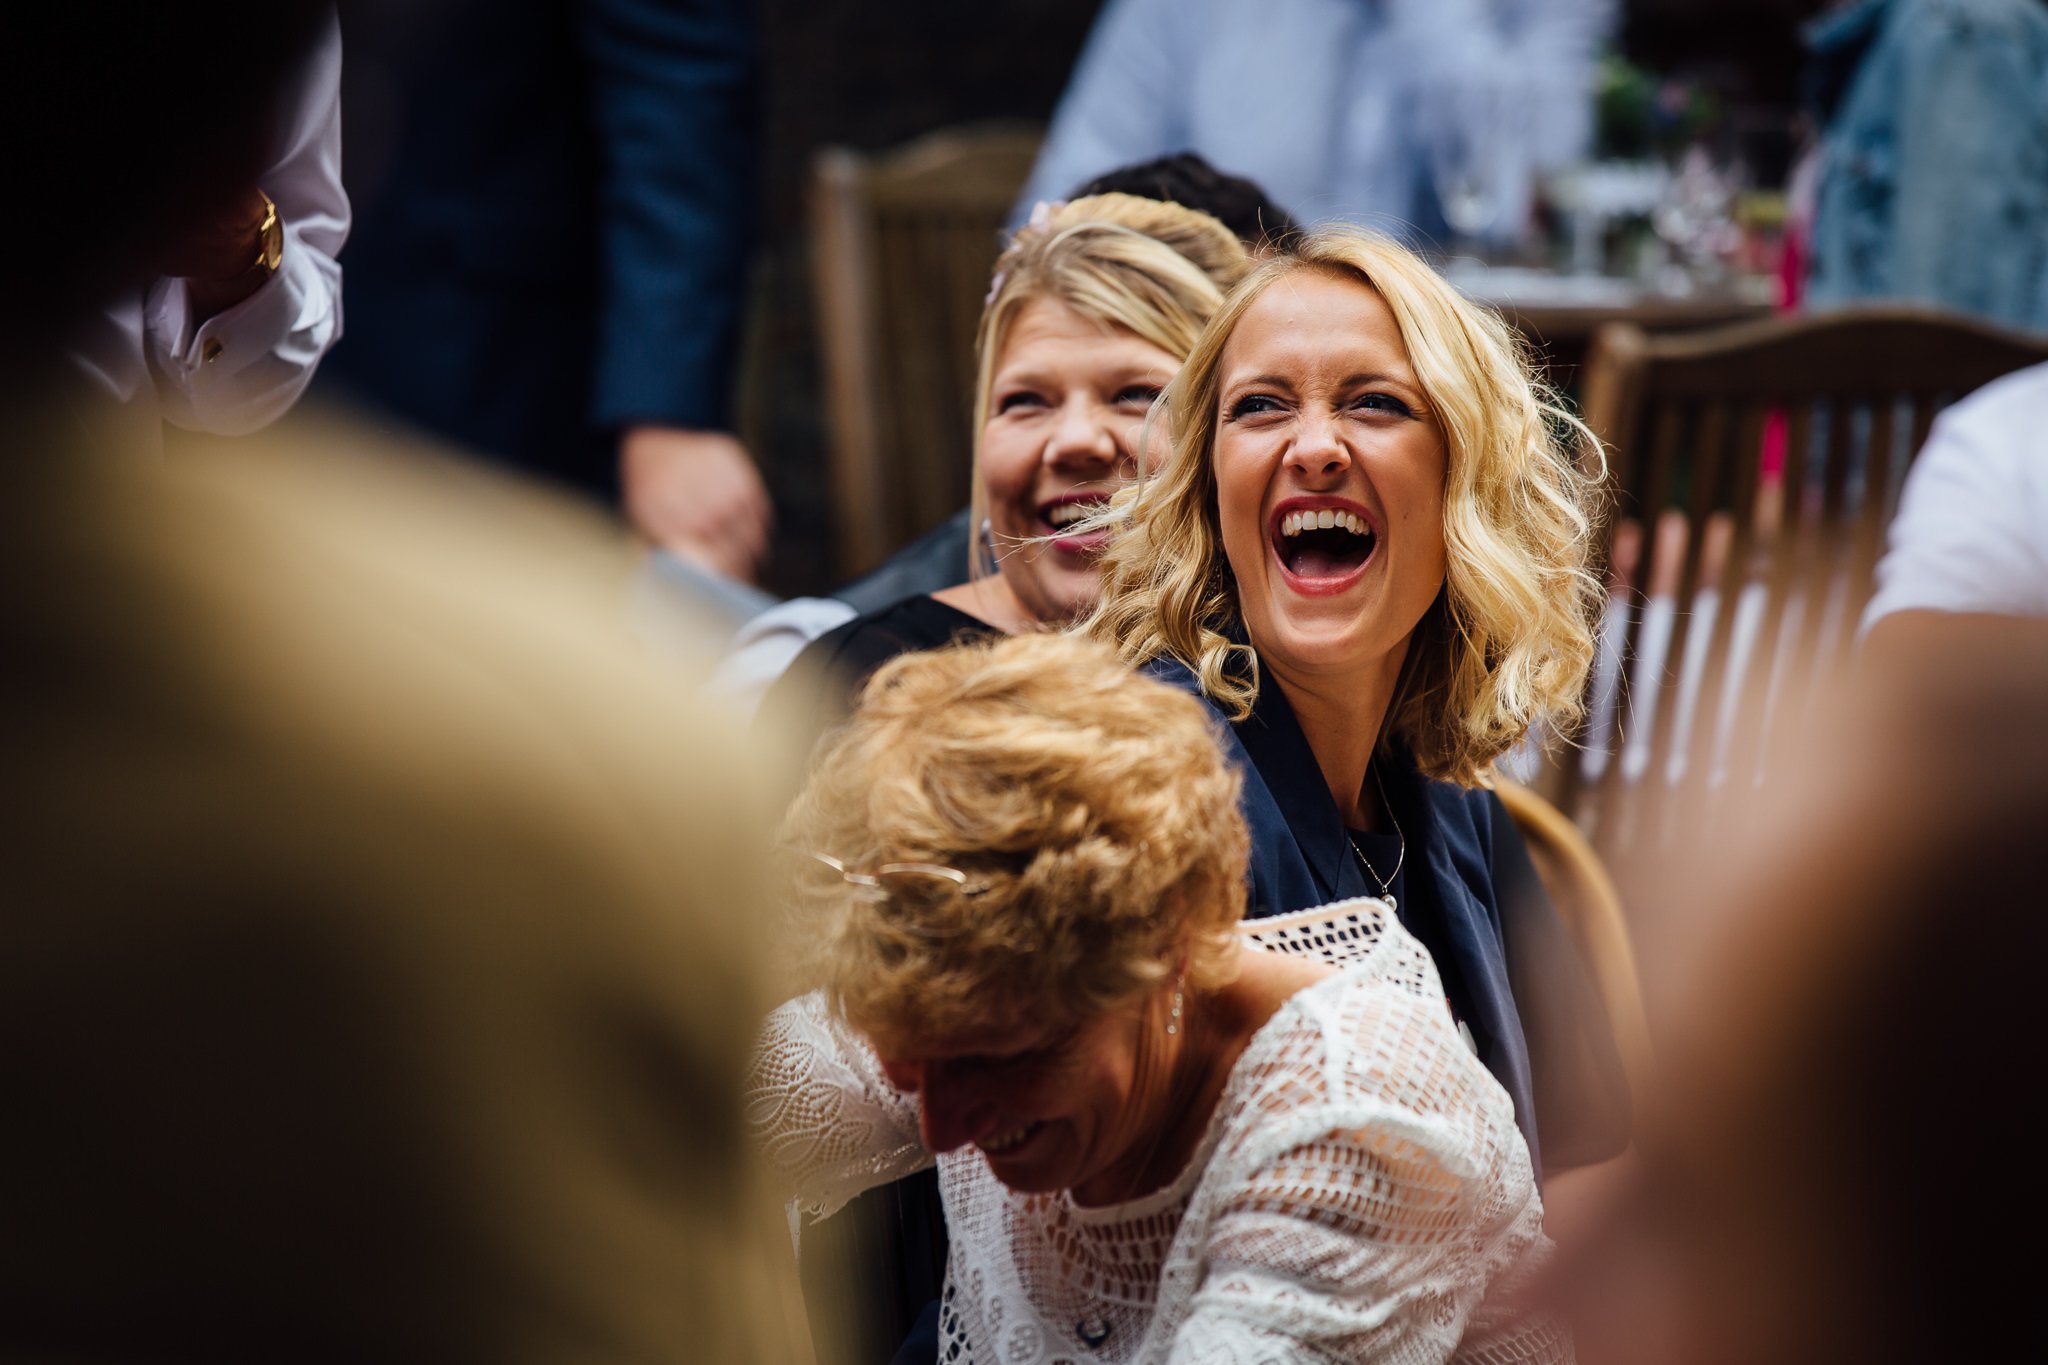  Female guest laughs during the wedding speeches 